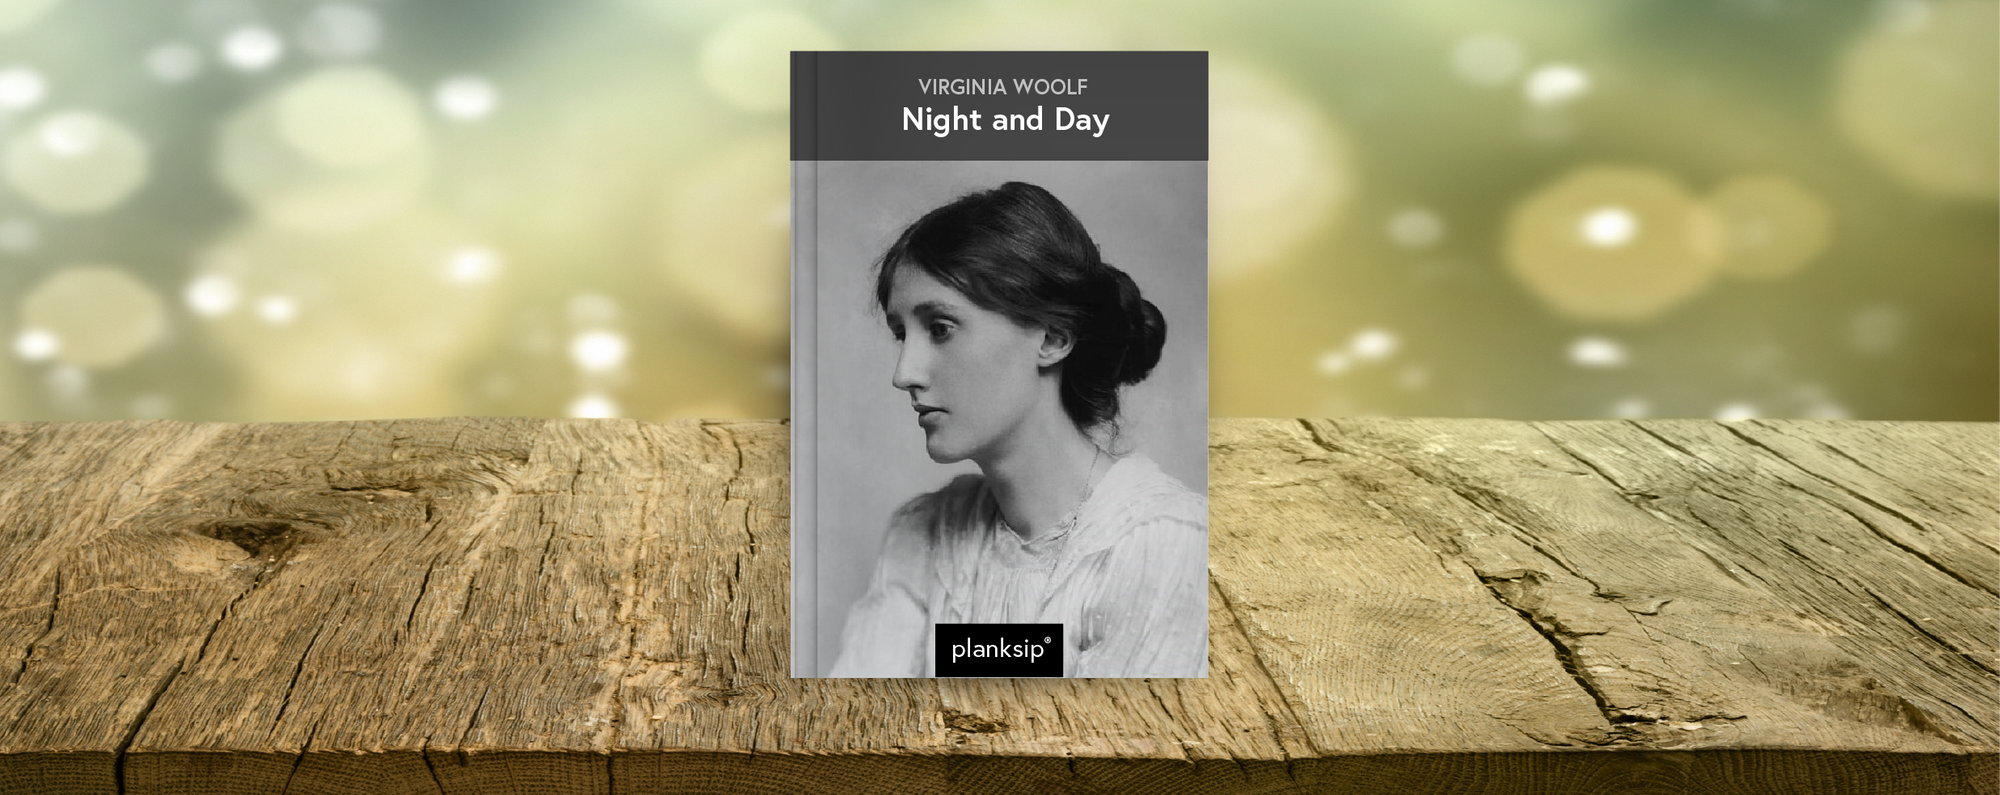 Night and Day by Virginia Woolf (1882-1941). Published by planksip